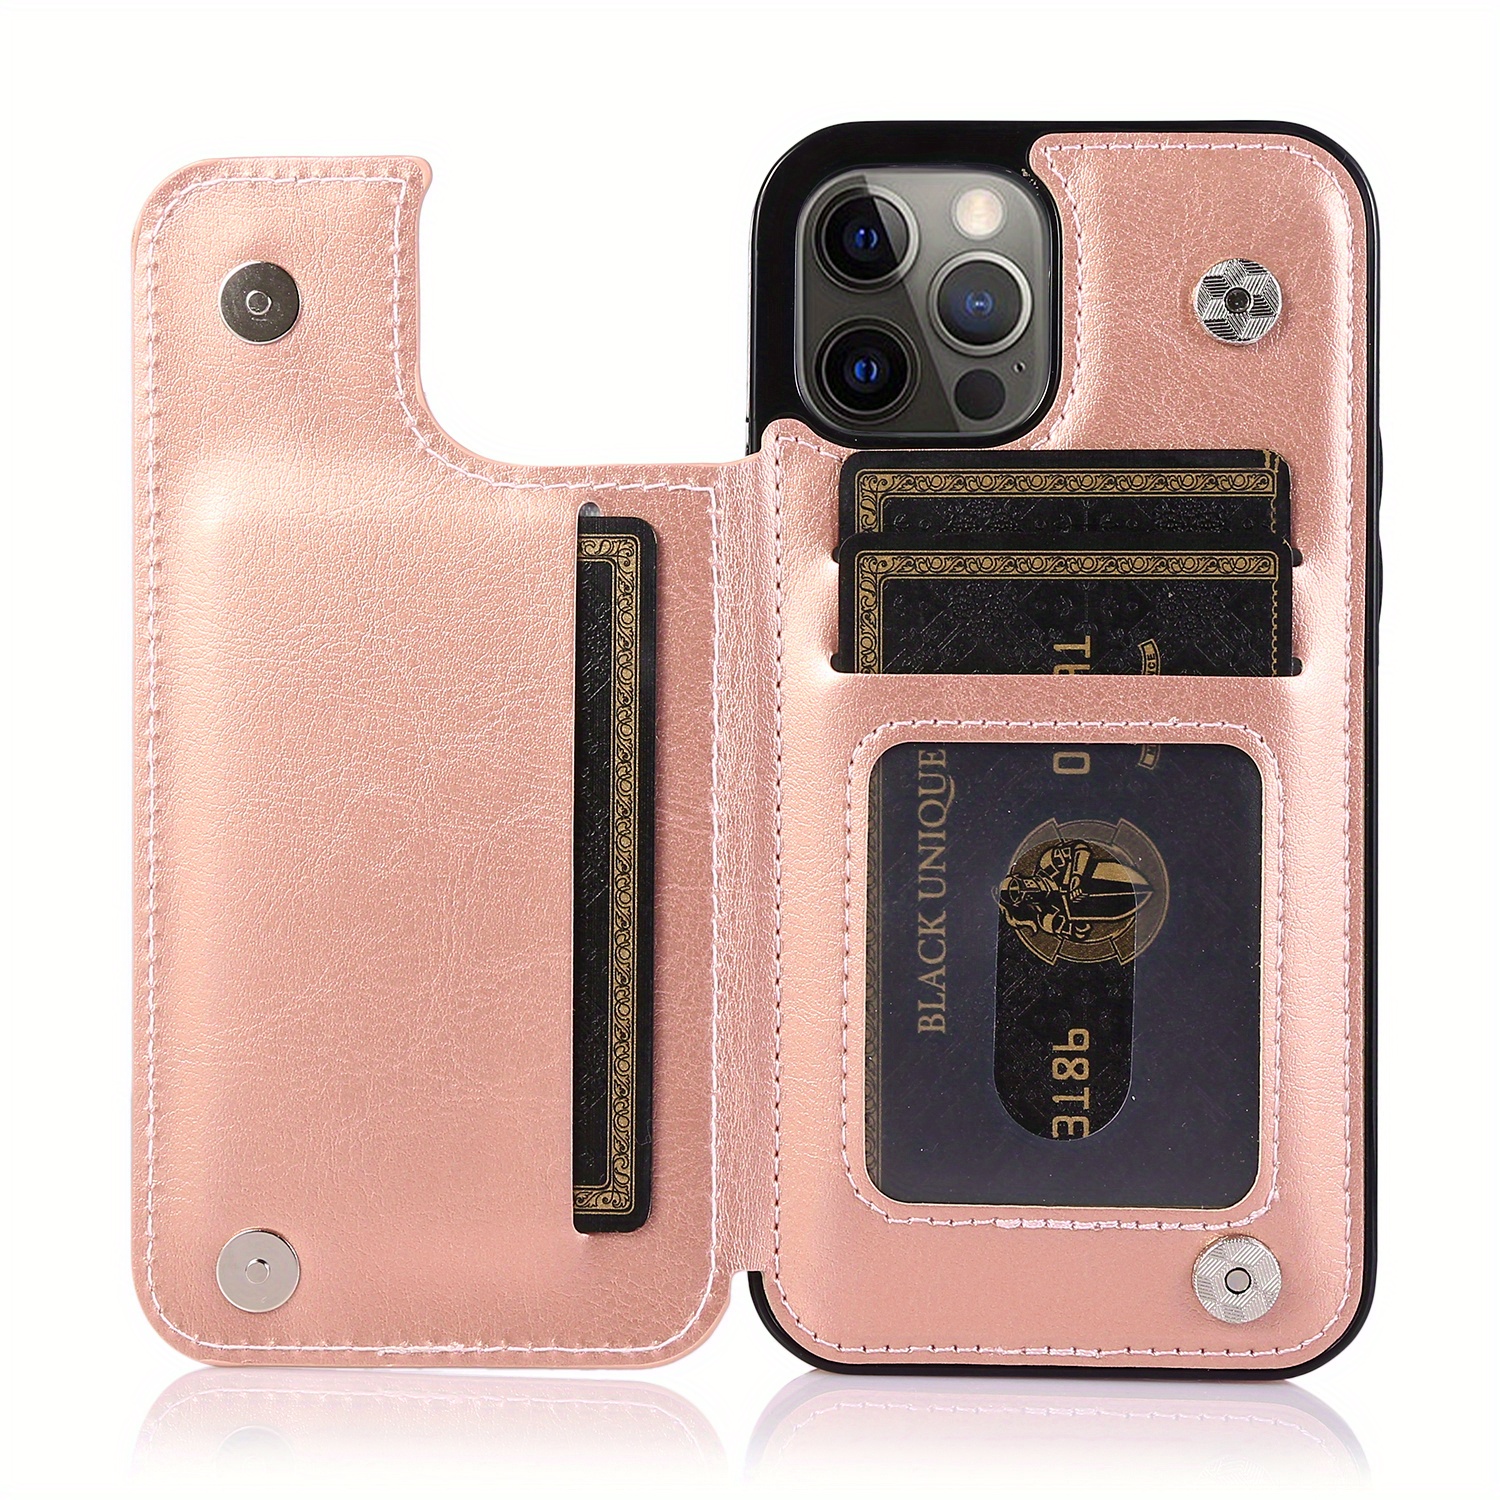 Fashion Square Leather Phone Case For iPhone 11 12 Pro Max XS MAX XR 7 8  Plus S